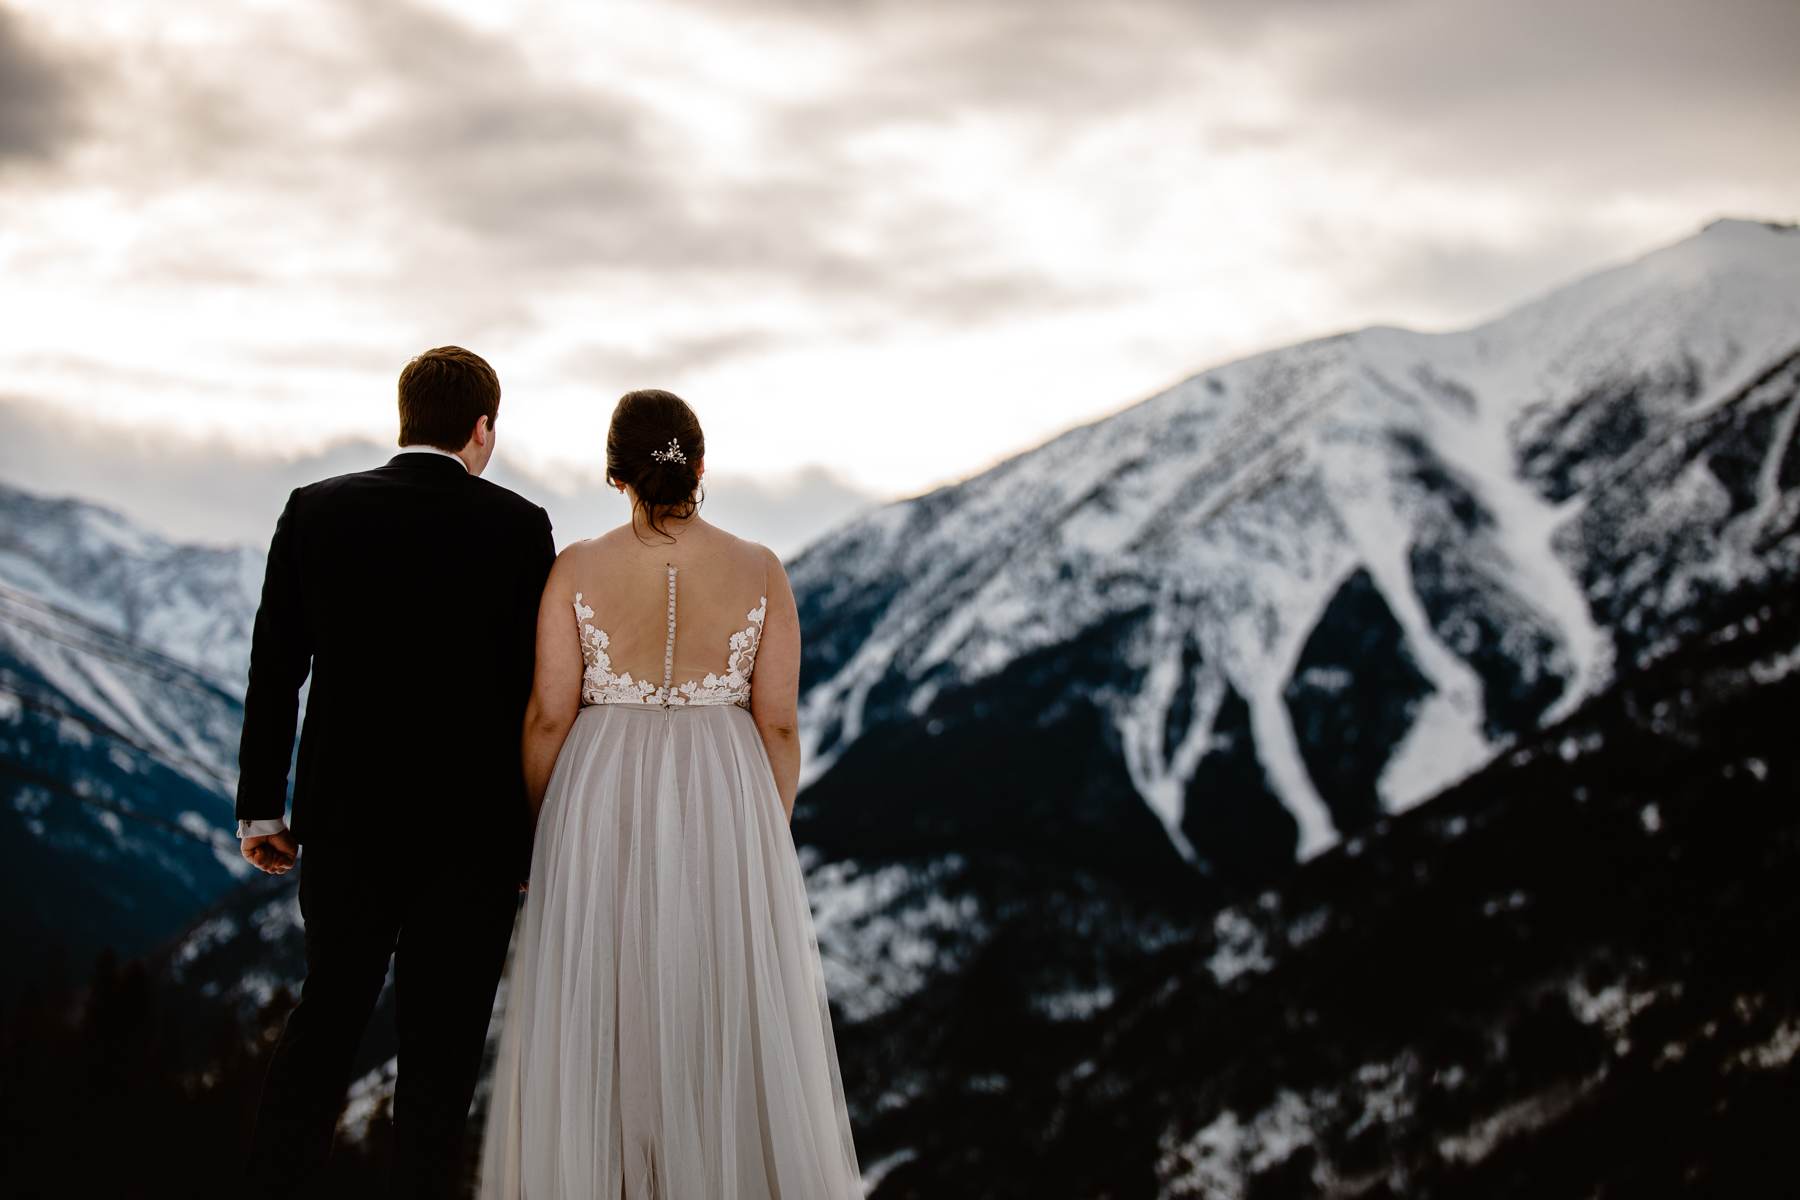 Invermere Wedding Photographers at Eagle Ranch and Panorama Ski Resort - Image 44